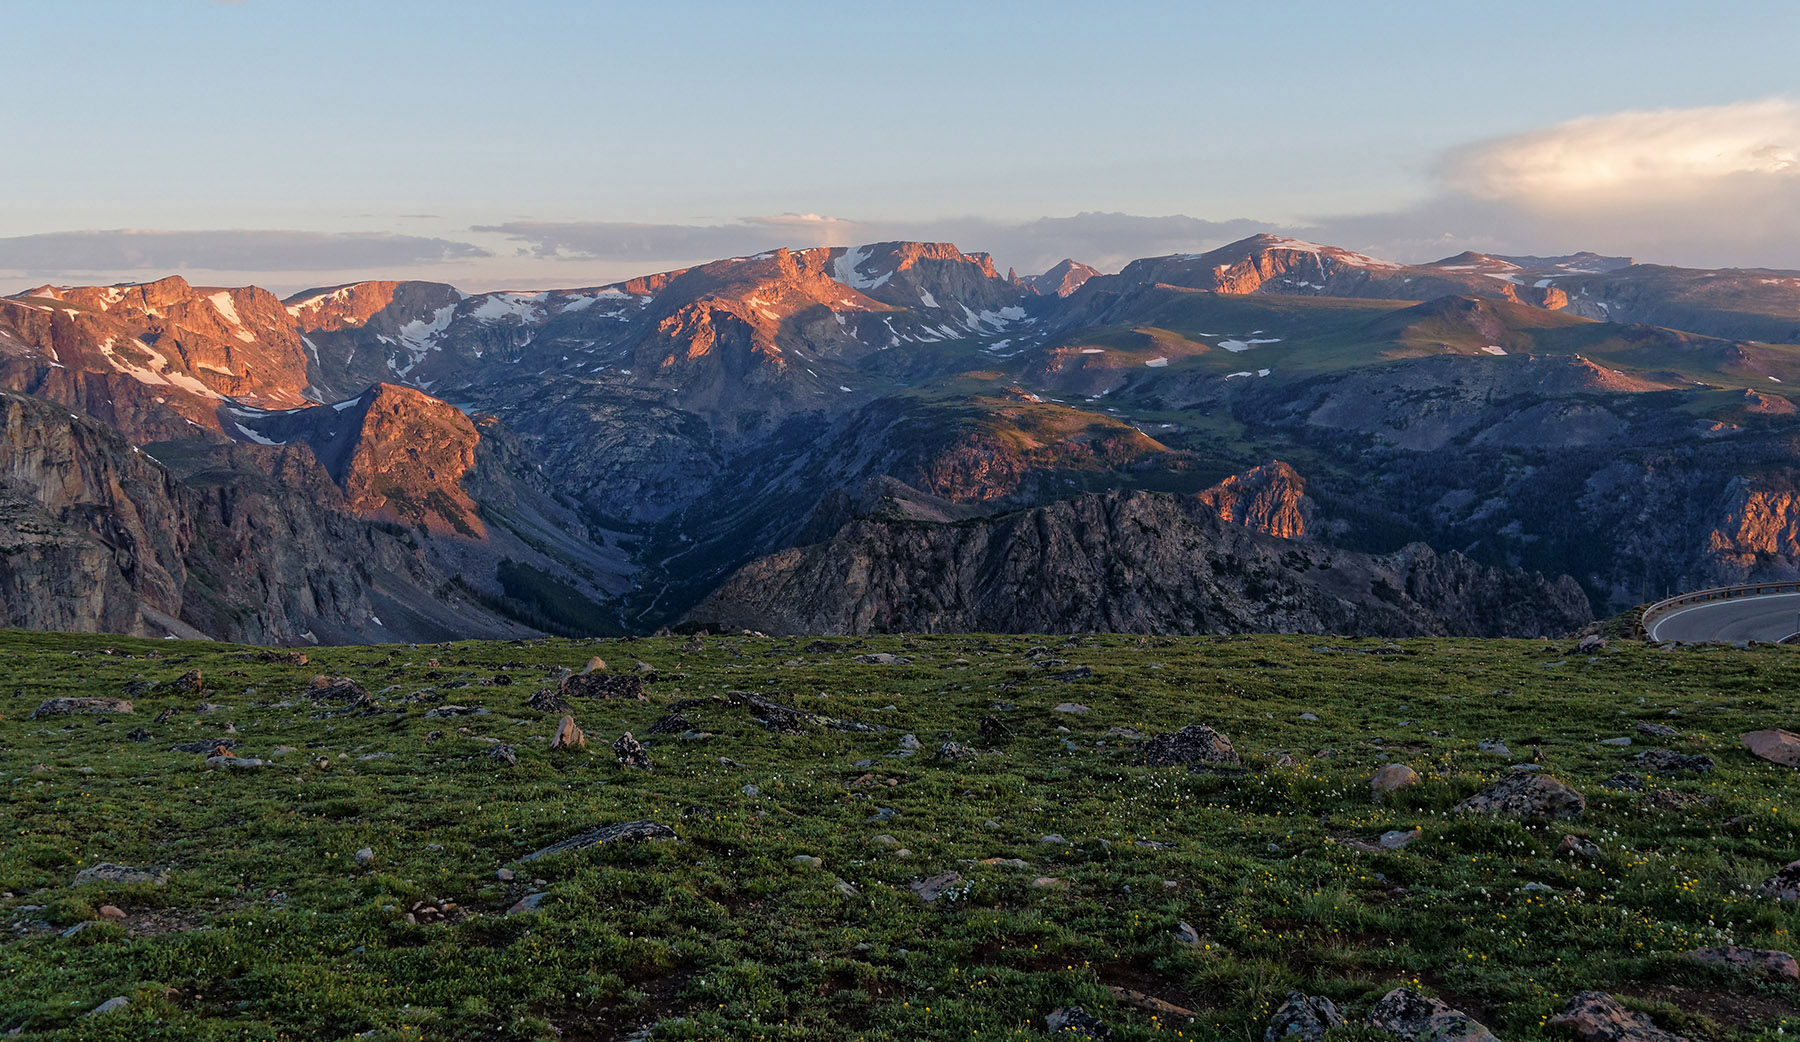 Beartooth Plateau at dawn.  This plateau and associated Beartooth Pass at 10,947 ft (3,337 m) was forced upward during the Laramide orogeny (150 million years ago - 150 MA) initiated by tectonic plate subduction  as what is now the western continent of North America was growing.  Overlying layers were eroded by water, wind and, most notably, by glacier activity (1.5 MA) down to Precambrian rock.  This plateau continues to rise as it is eroded due to the Yellowstone hot spot.